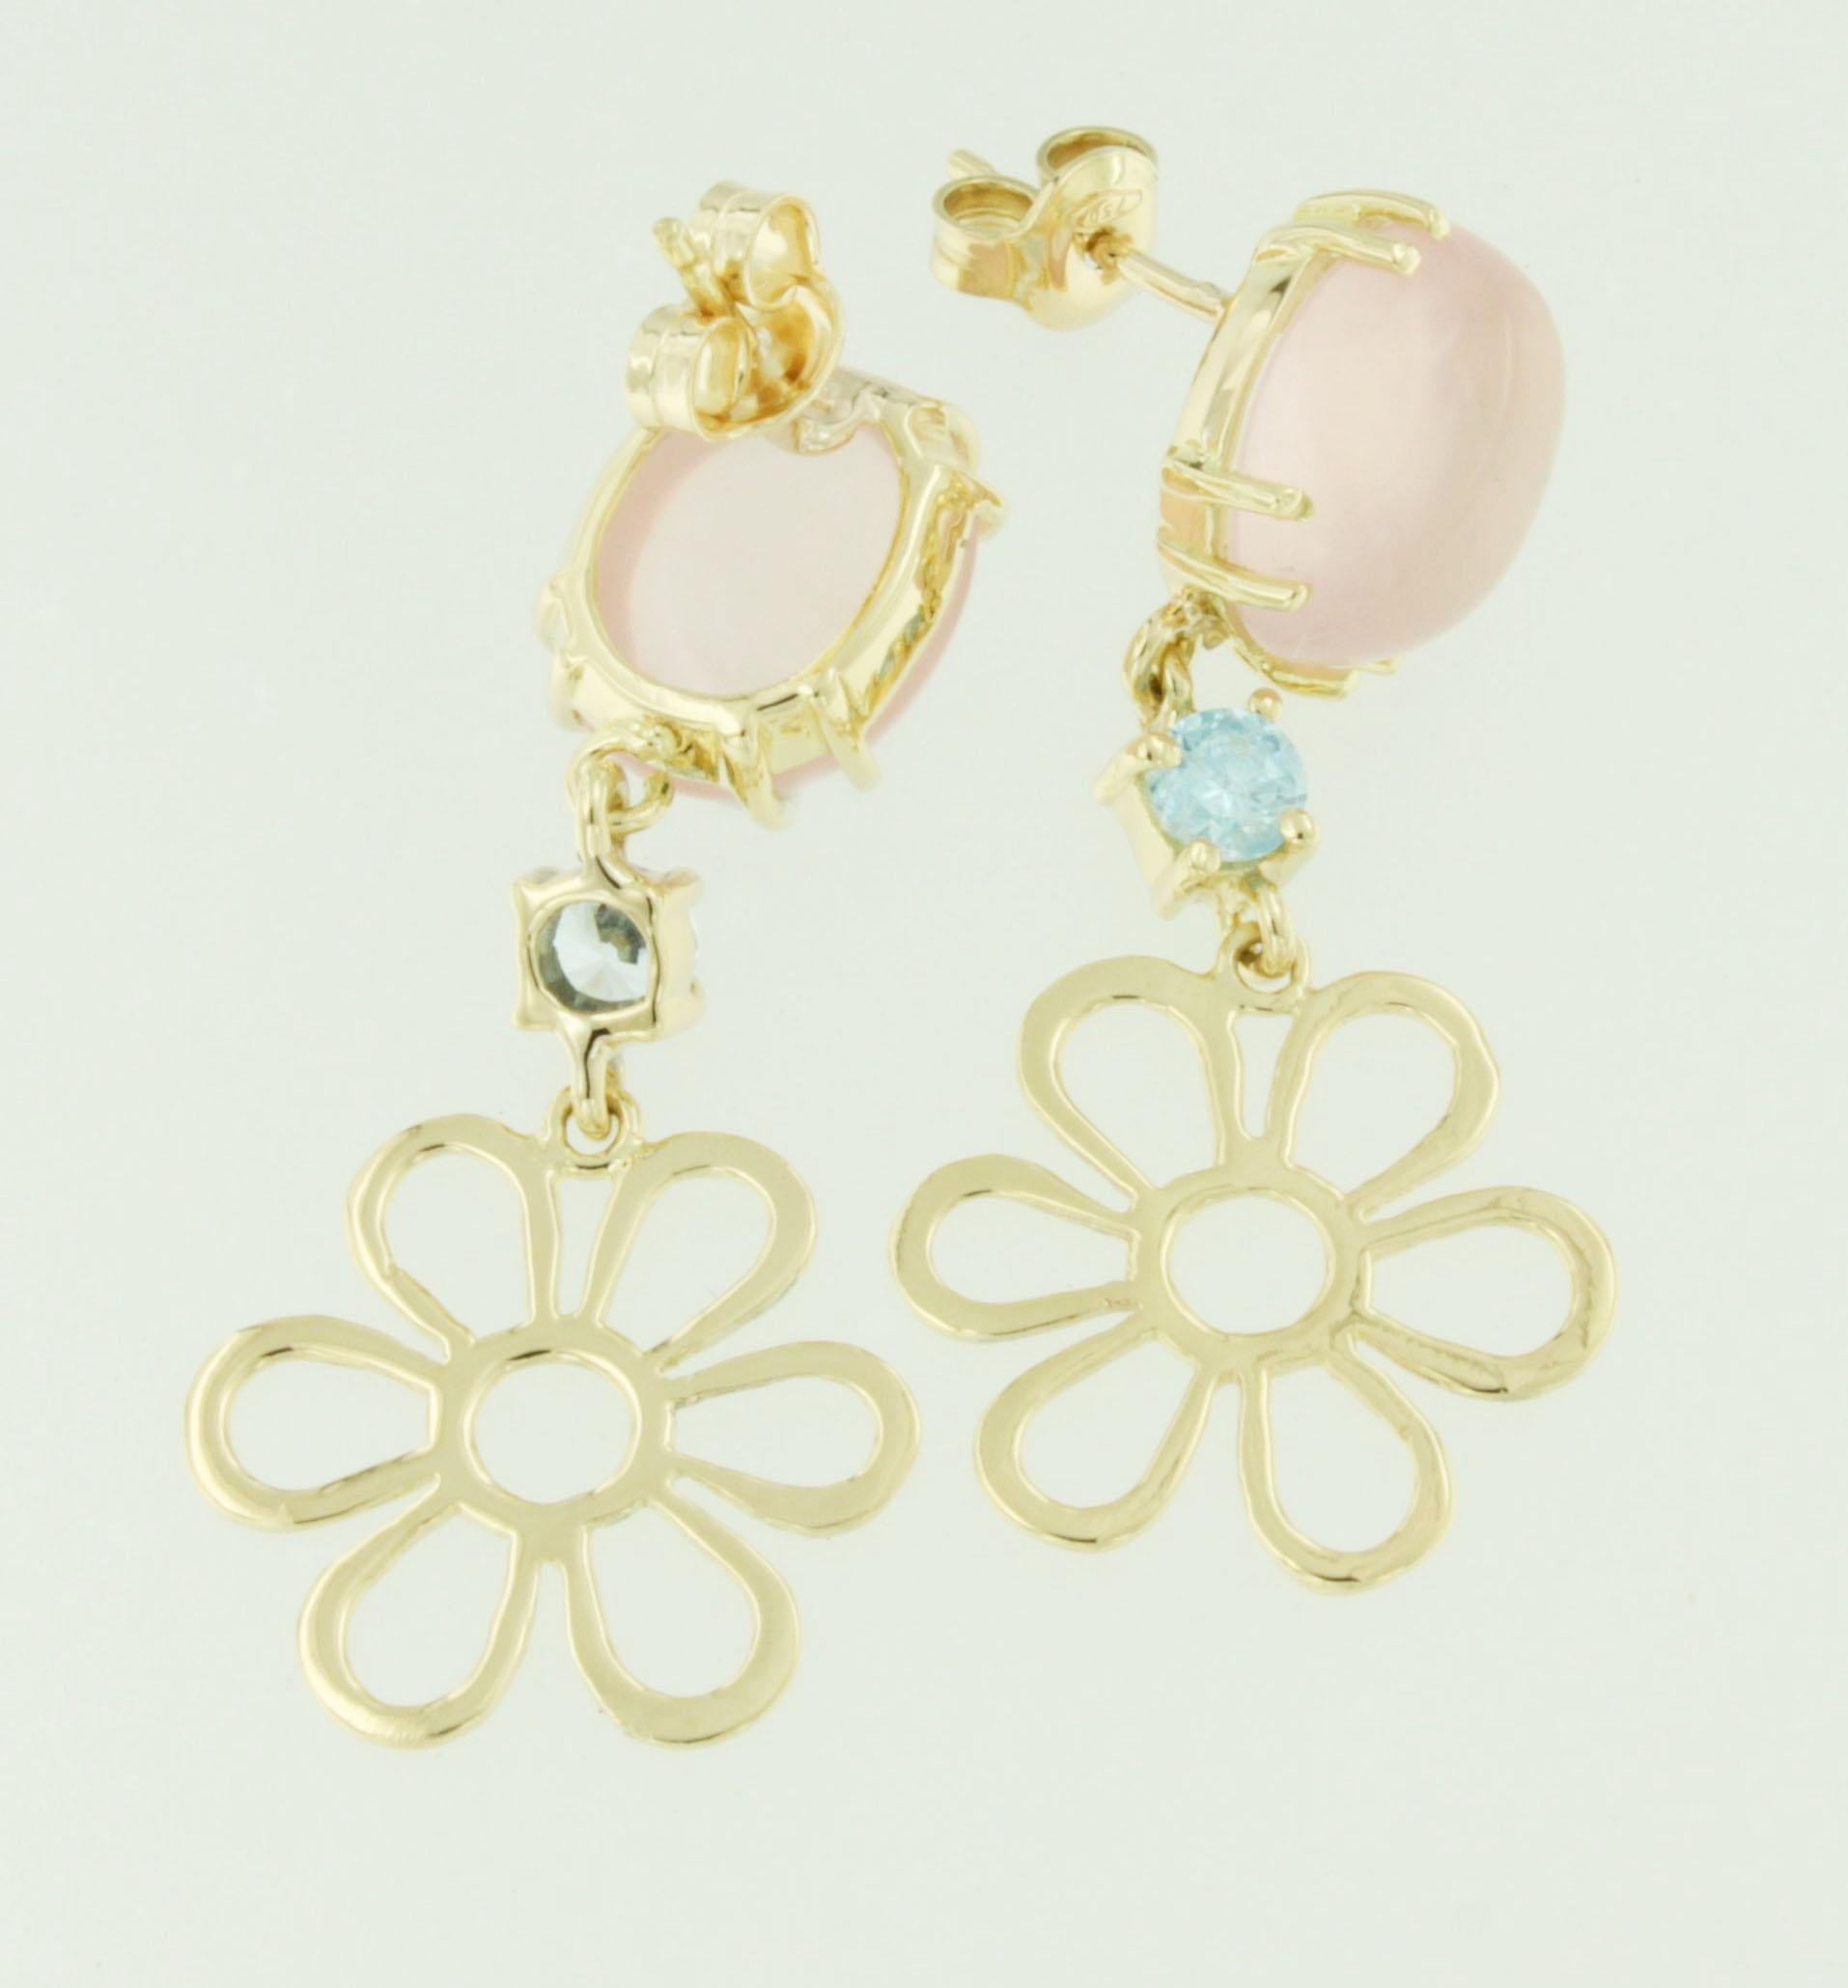 The daisy flower is a flower that grows with a unique eternal beauty, simple, elegant, unique.
Yellow gold with Blue Topaz, Pink quartz , earrings to wear every day for all occasions, inspired by nature and its beauties.
Everything made and designed